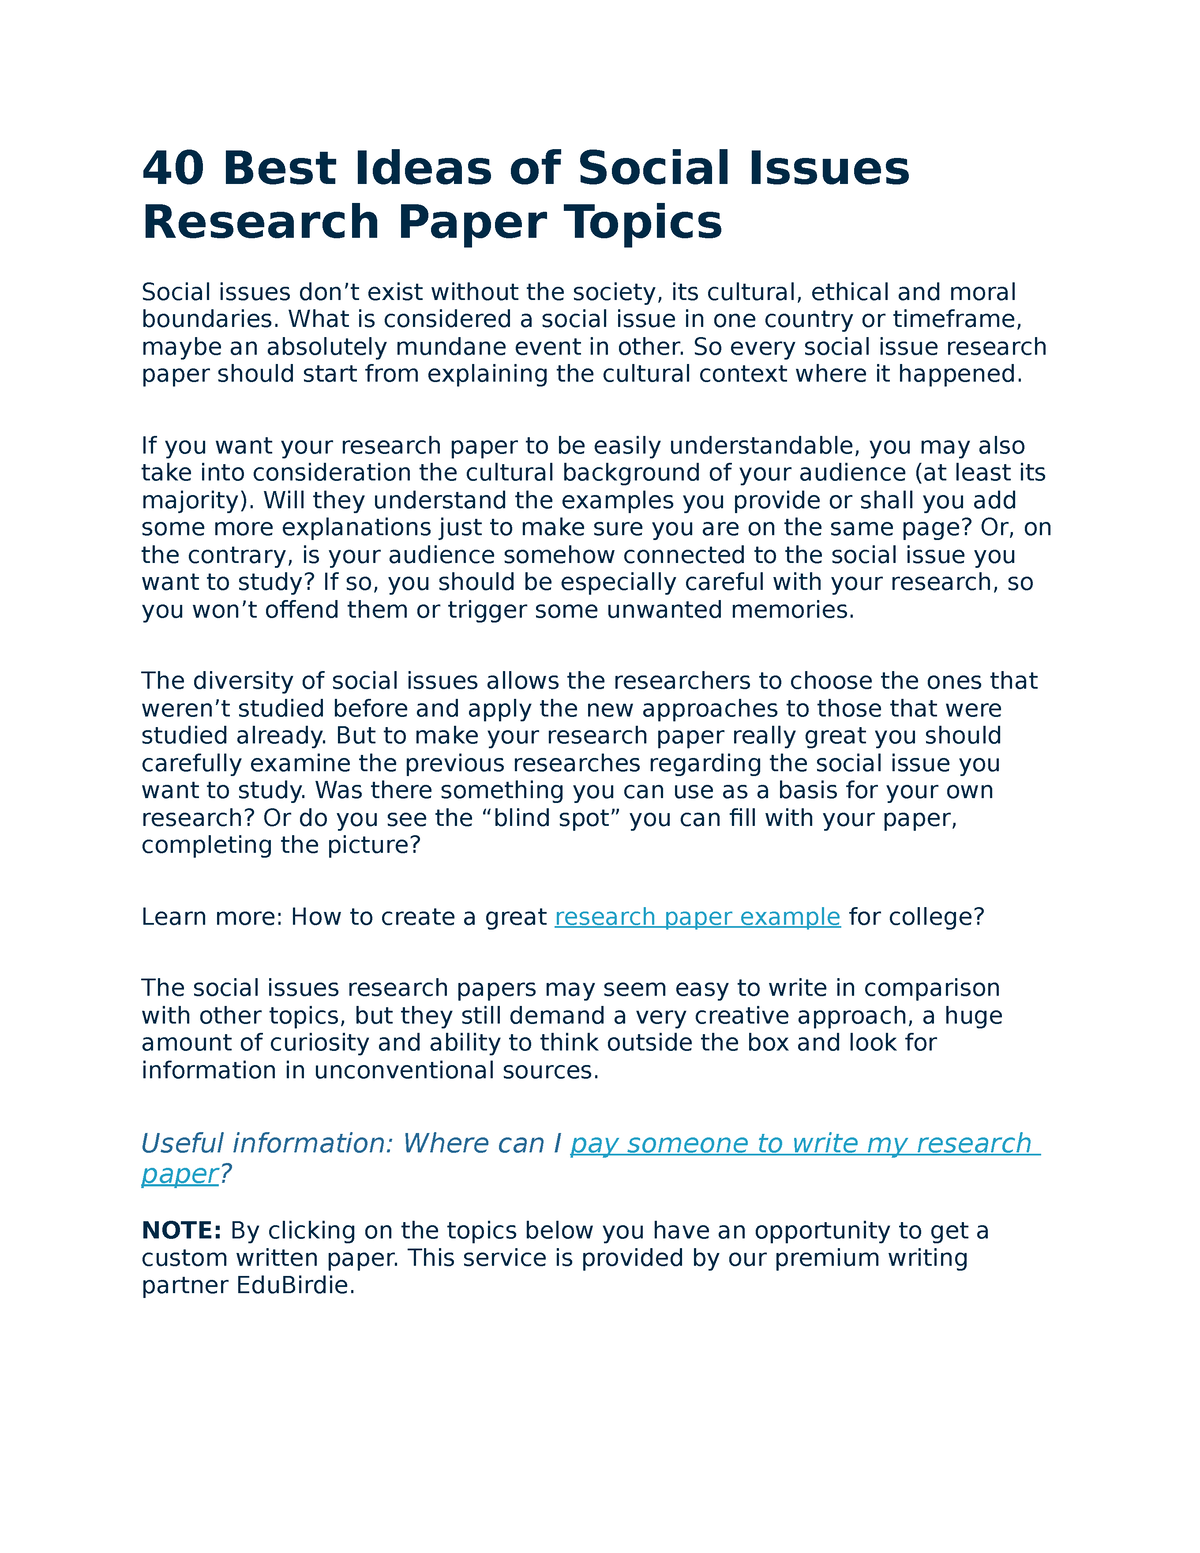 social issue research paper ideas